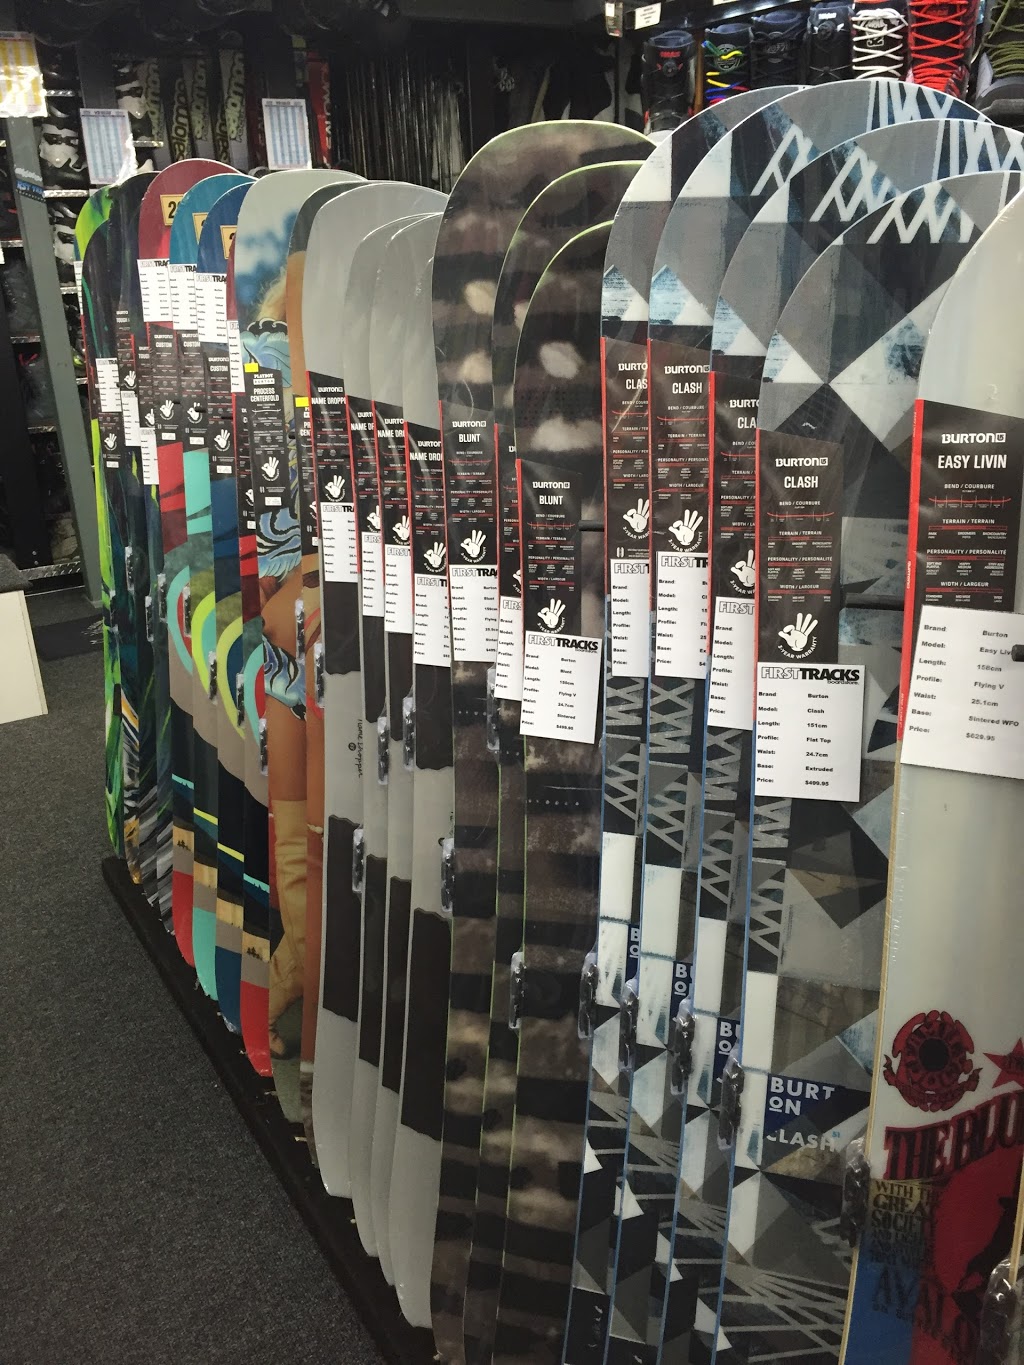 First Tracks Snowboards | store | 1/131 Snowy River Ave, 1A Nuggets Crossing, Jindabyne NSW 2627, Australia | 0264561788 OR +61 2 6456 1788